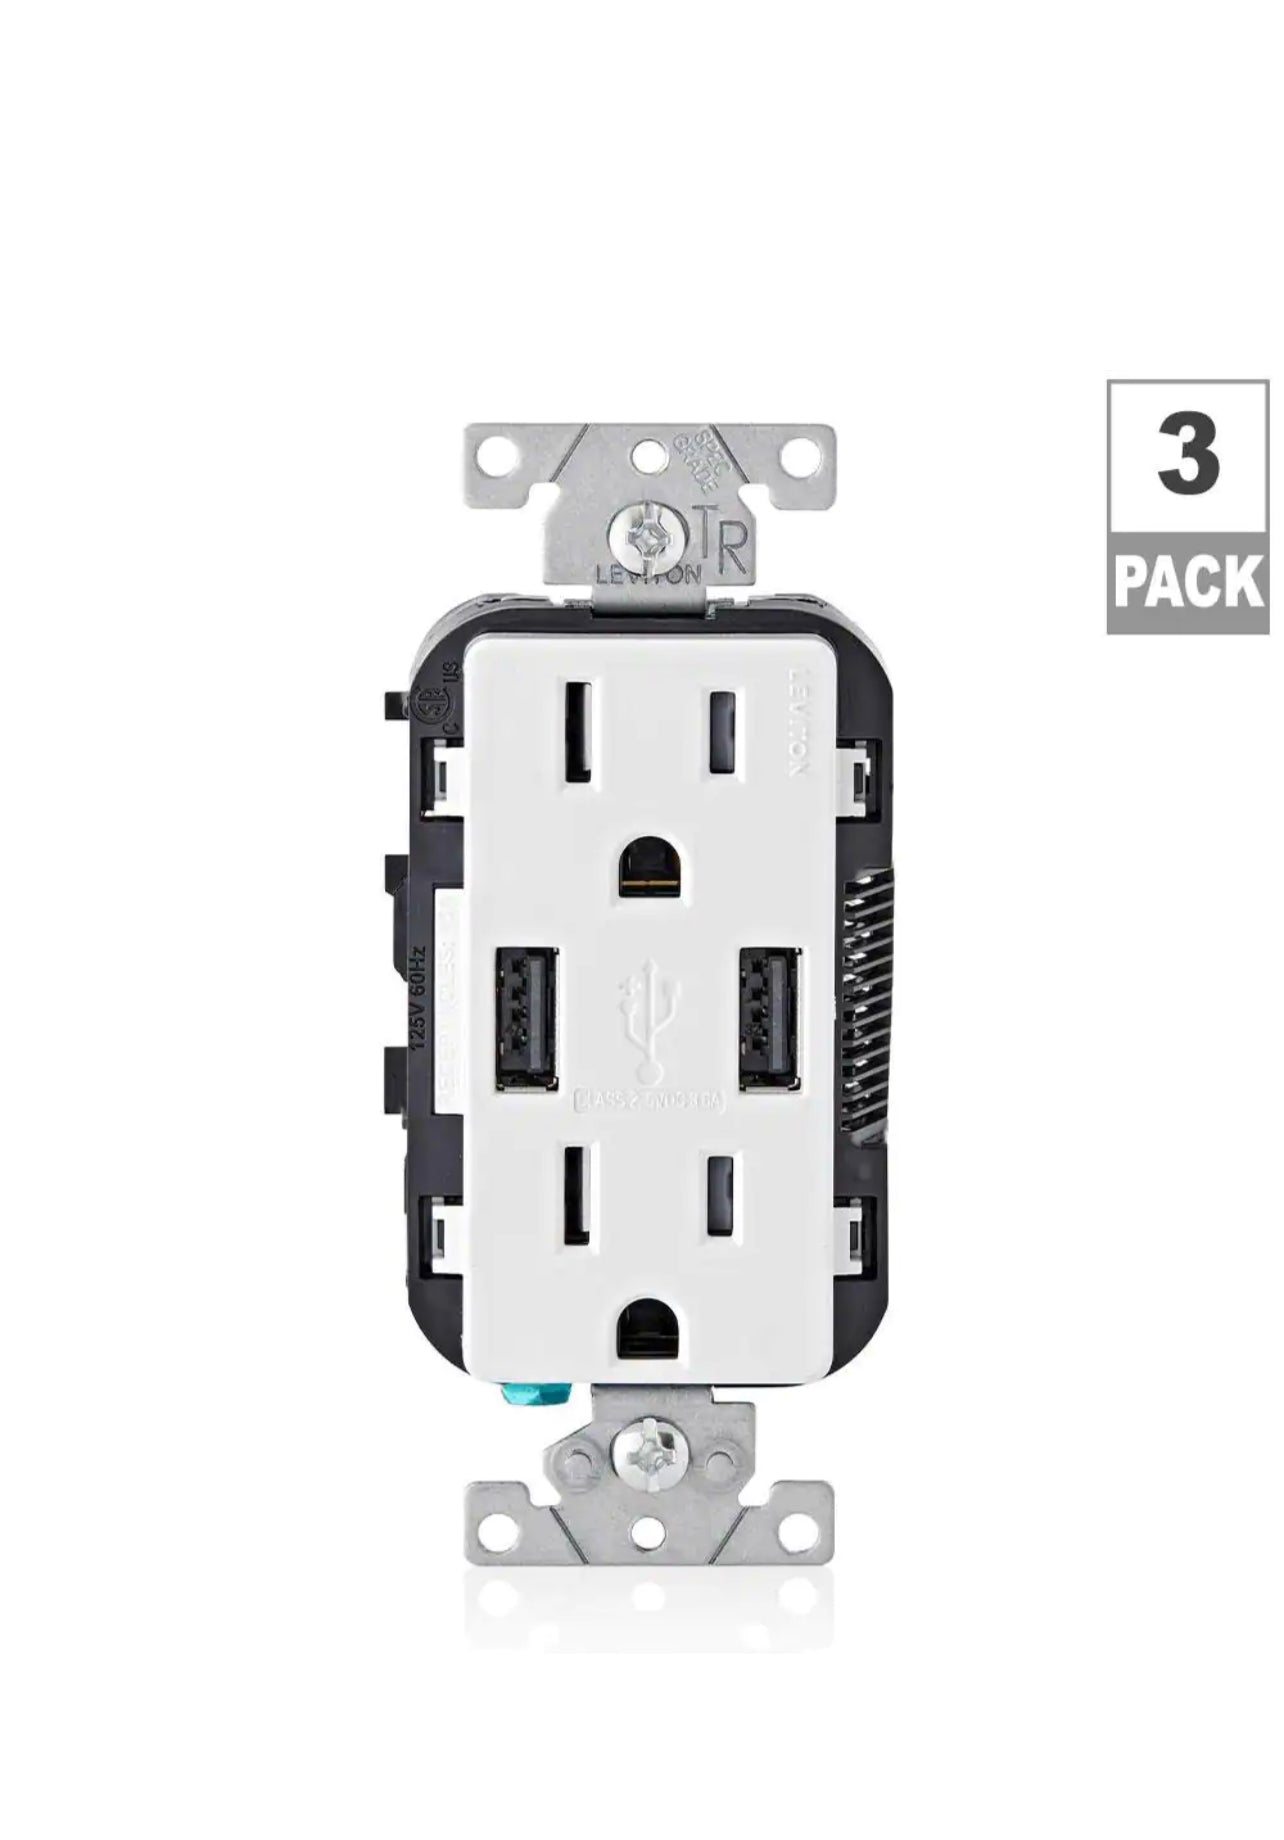 Leviton 15 Amp Decora Combination Tamper Resistant Duplex Outlet and USB Charger, White (3-Pack) Damaged Box